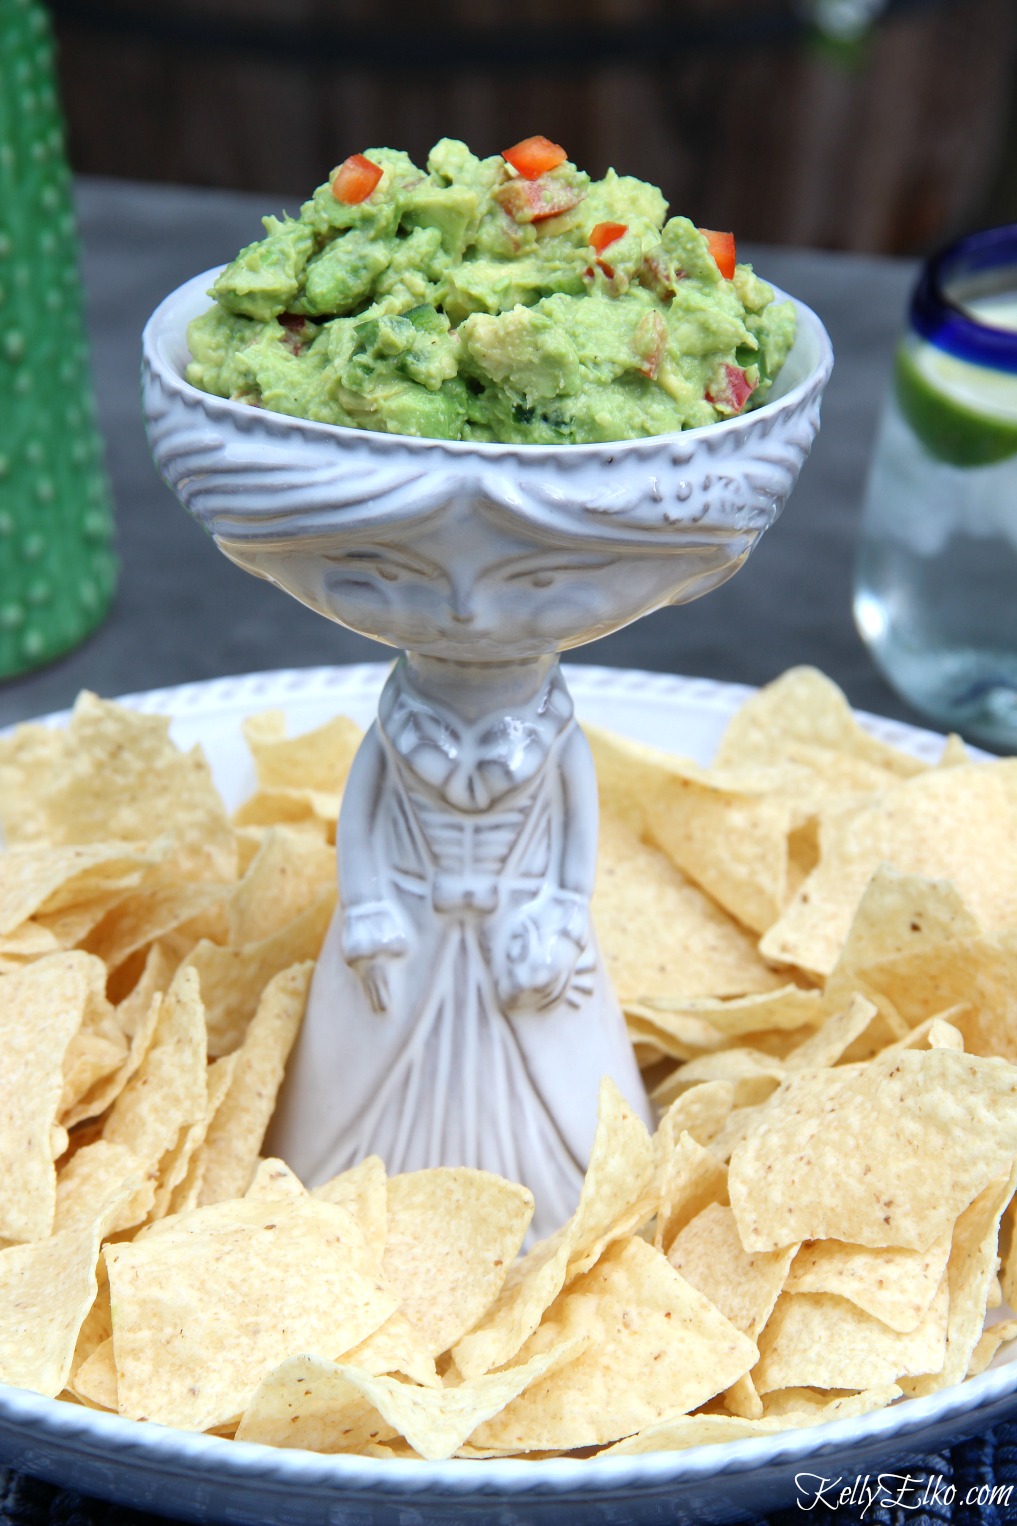 Carmen chip and dip bowl and a delicious guacamole recipe kellyelko.com #guacamole #guac #recipes #appetizers #cincodemayo #mexicanfood #partyfood #dips 